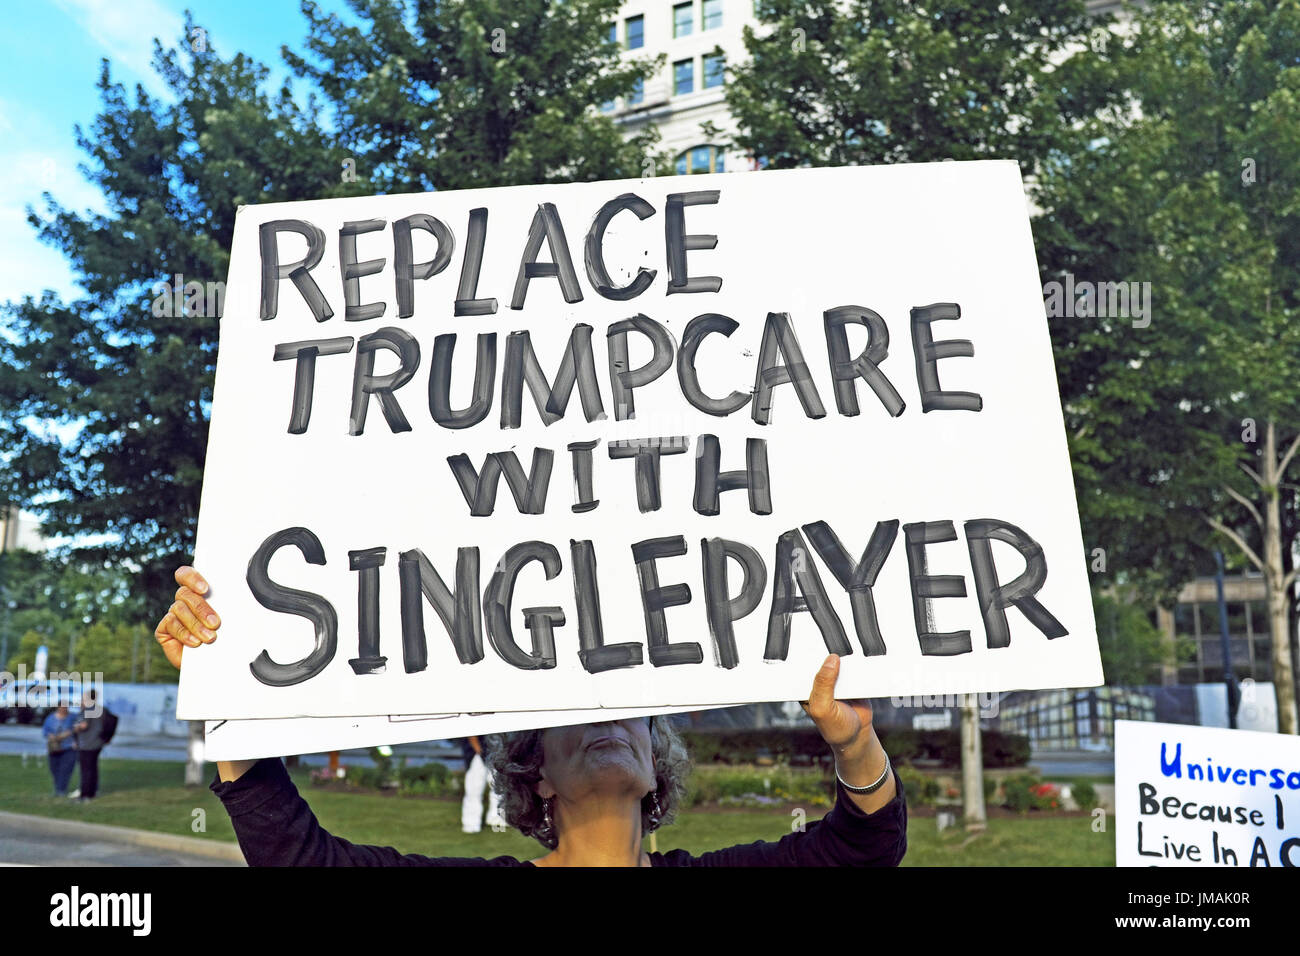 Youngstown, Ohio, USA. 25th Jul, 2017. 'Replace Trumpcare with singlepayer system' is one woman's public protest sign held up on a street corner on an evening that President Trump was visiting the city for a political rally. Credit: Mark Kanning/Alamy Live News Stock Photo